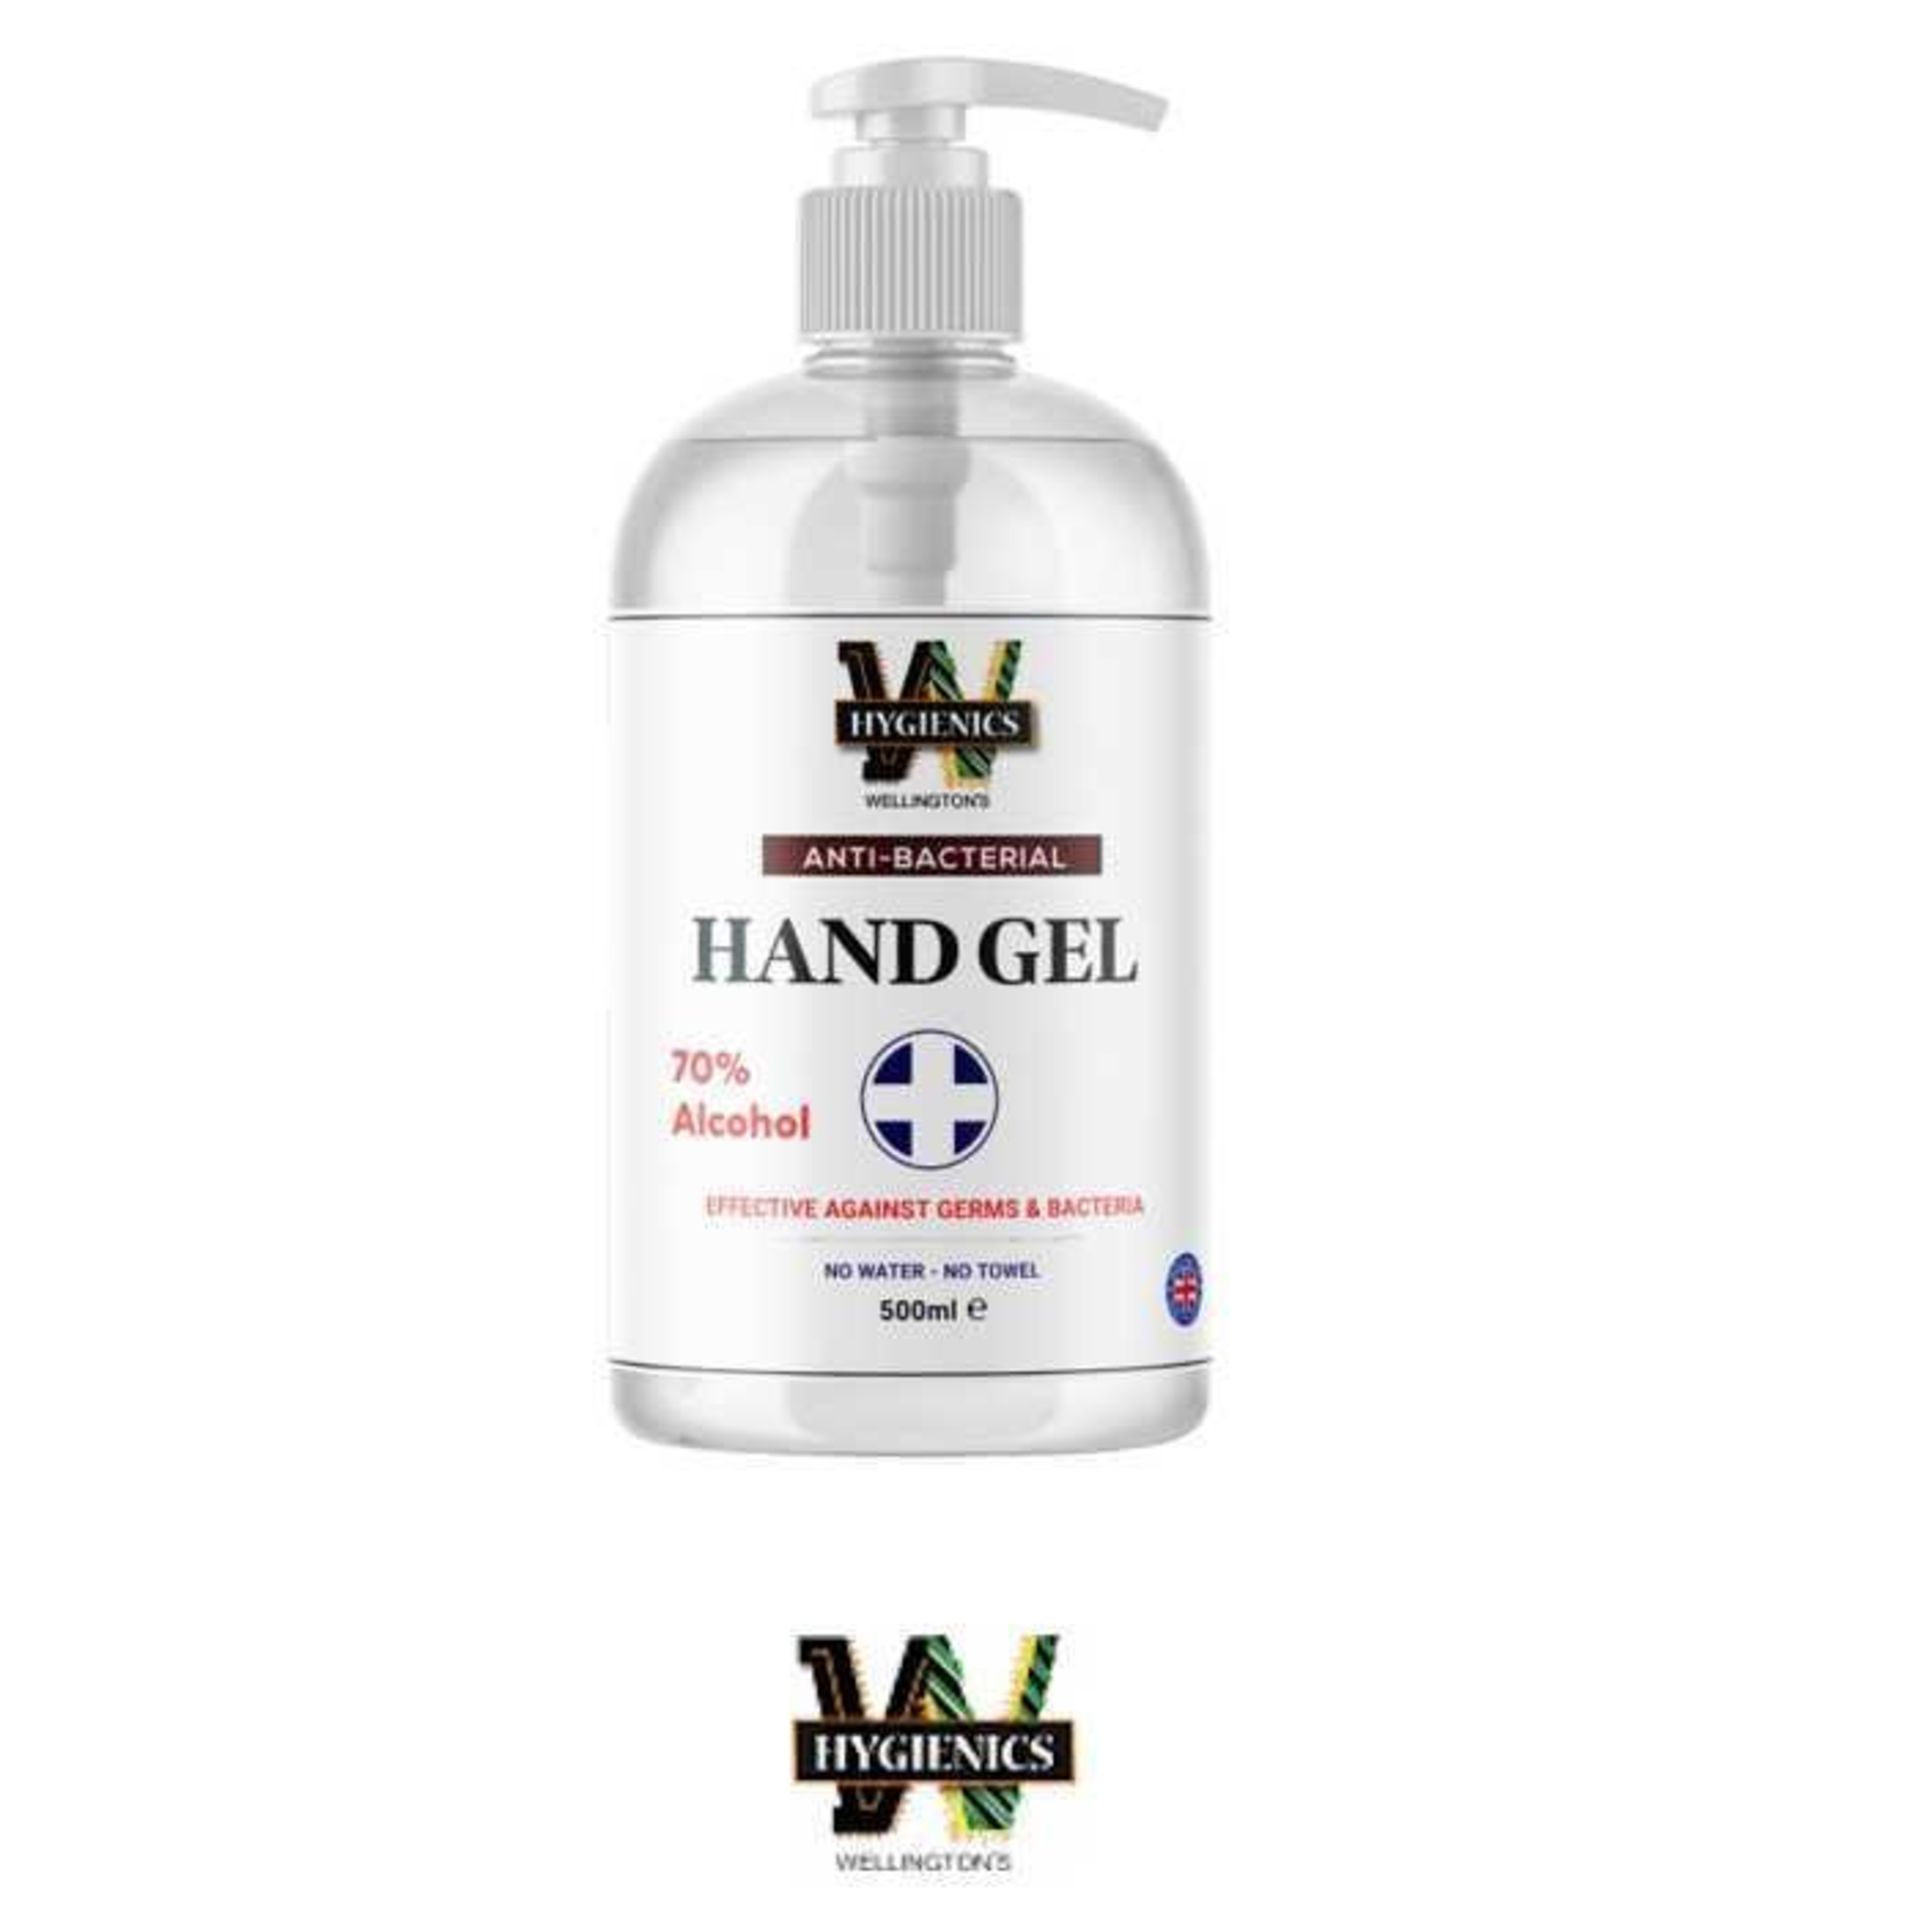 RRP £350 Box To Contain 35 Brand New Wellington 500Ml Hand Sanitizing Anti Bacterial Gels